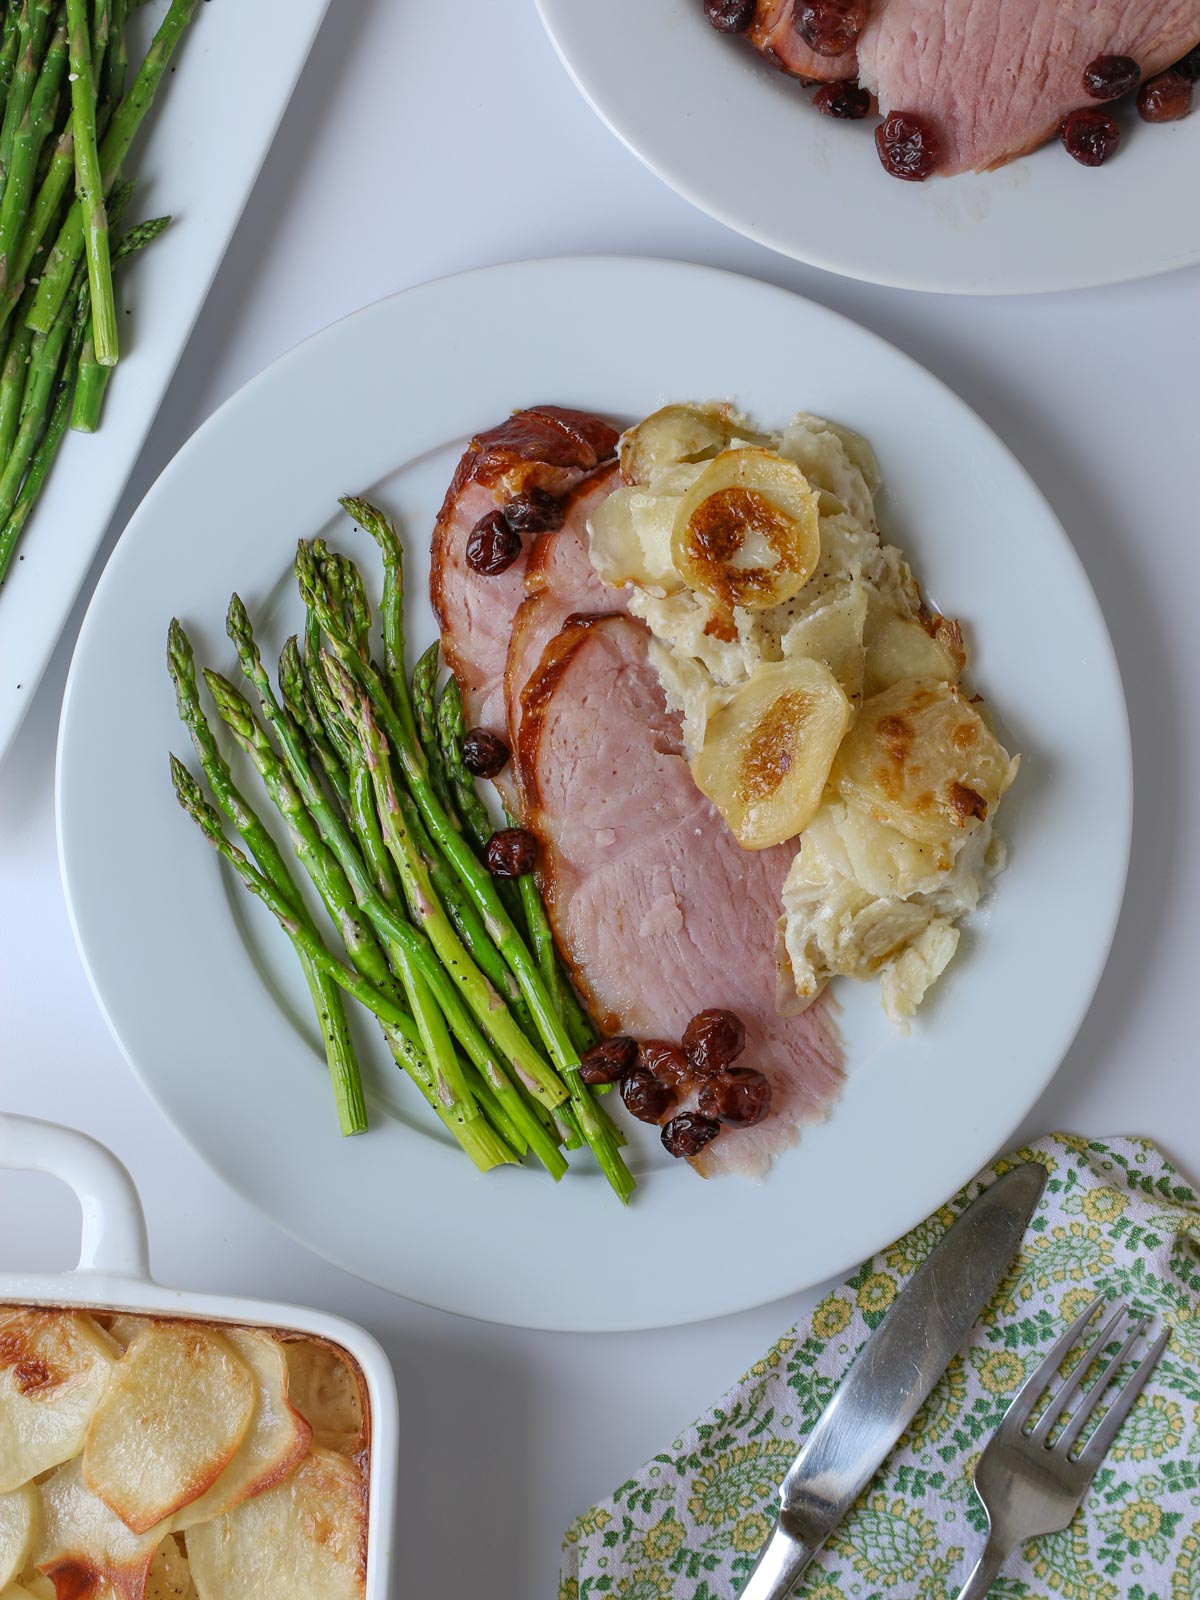 Easter dinner plate with asparagus, ham, and potatoes, with platters nearby.